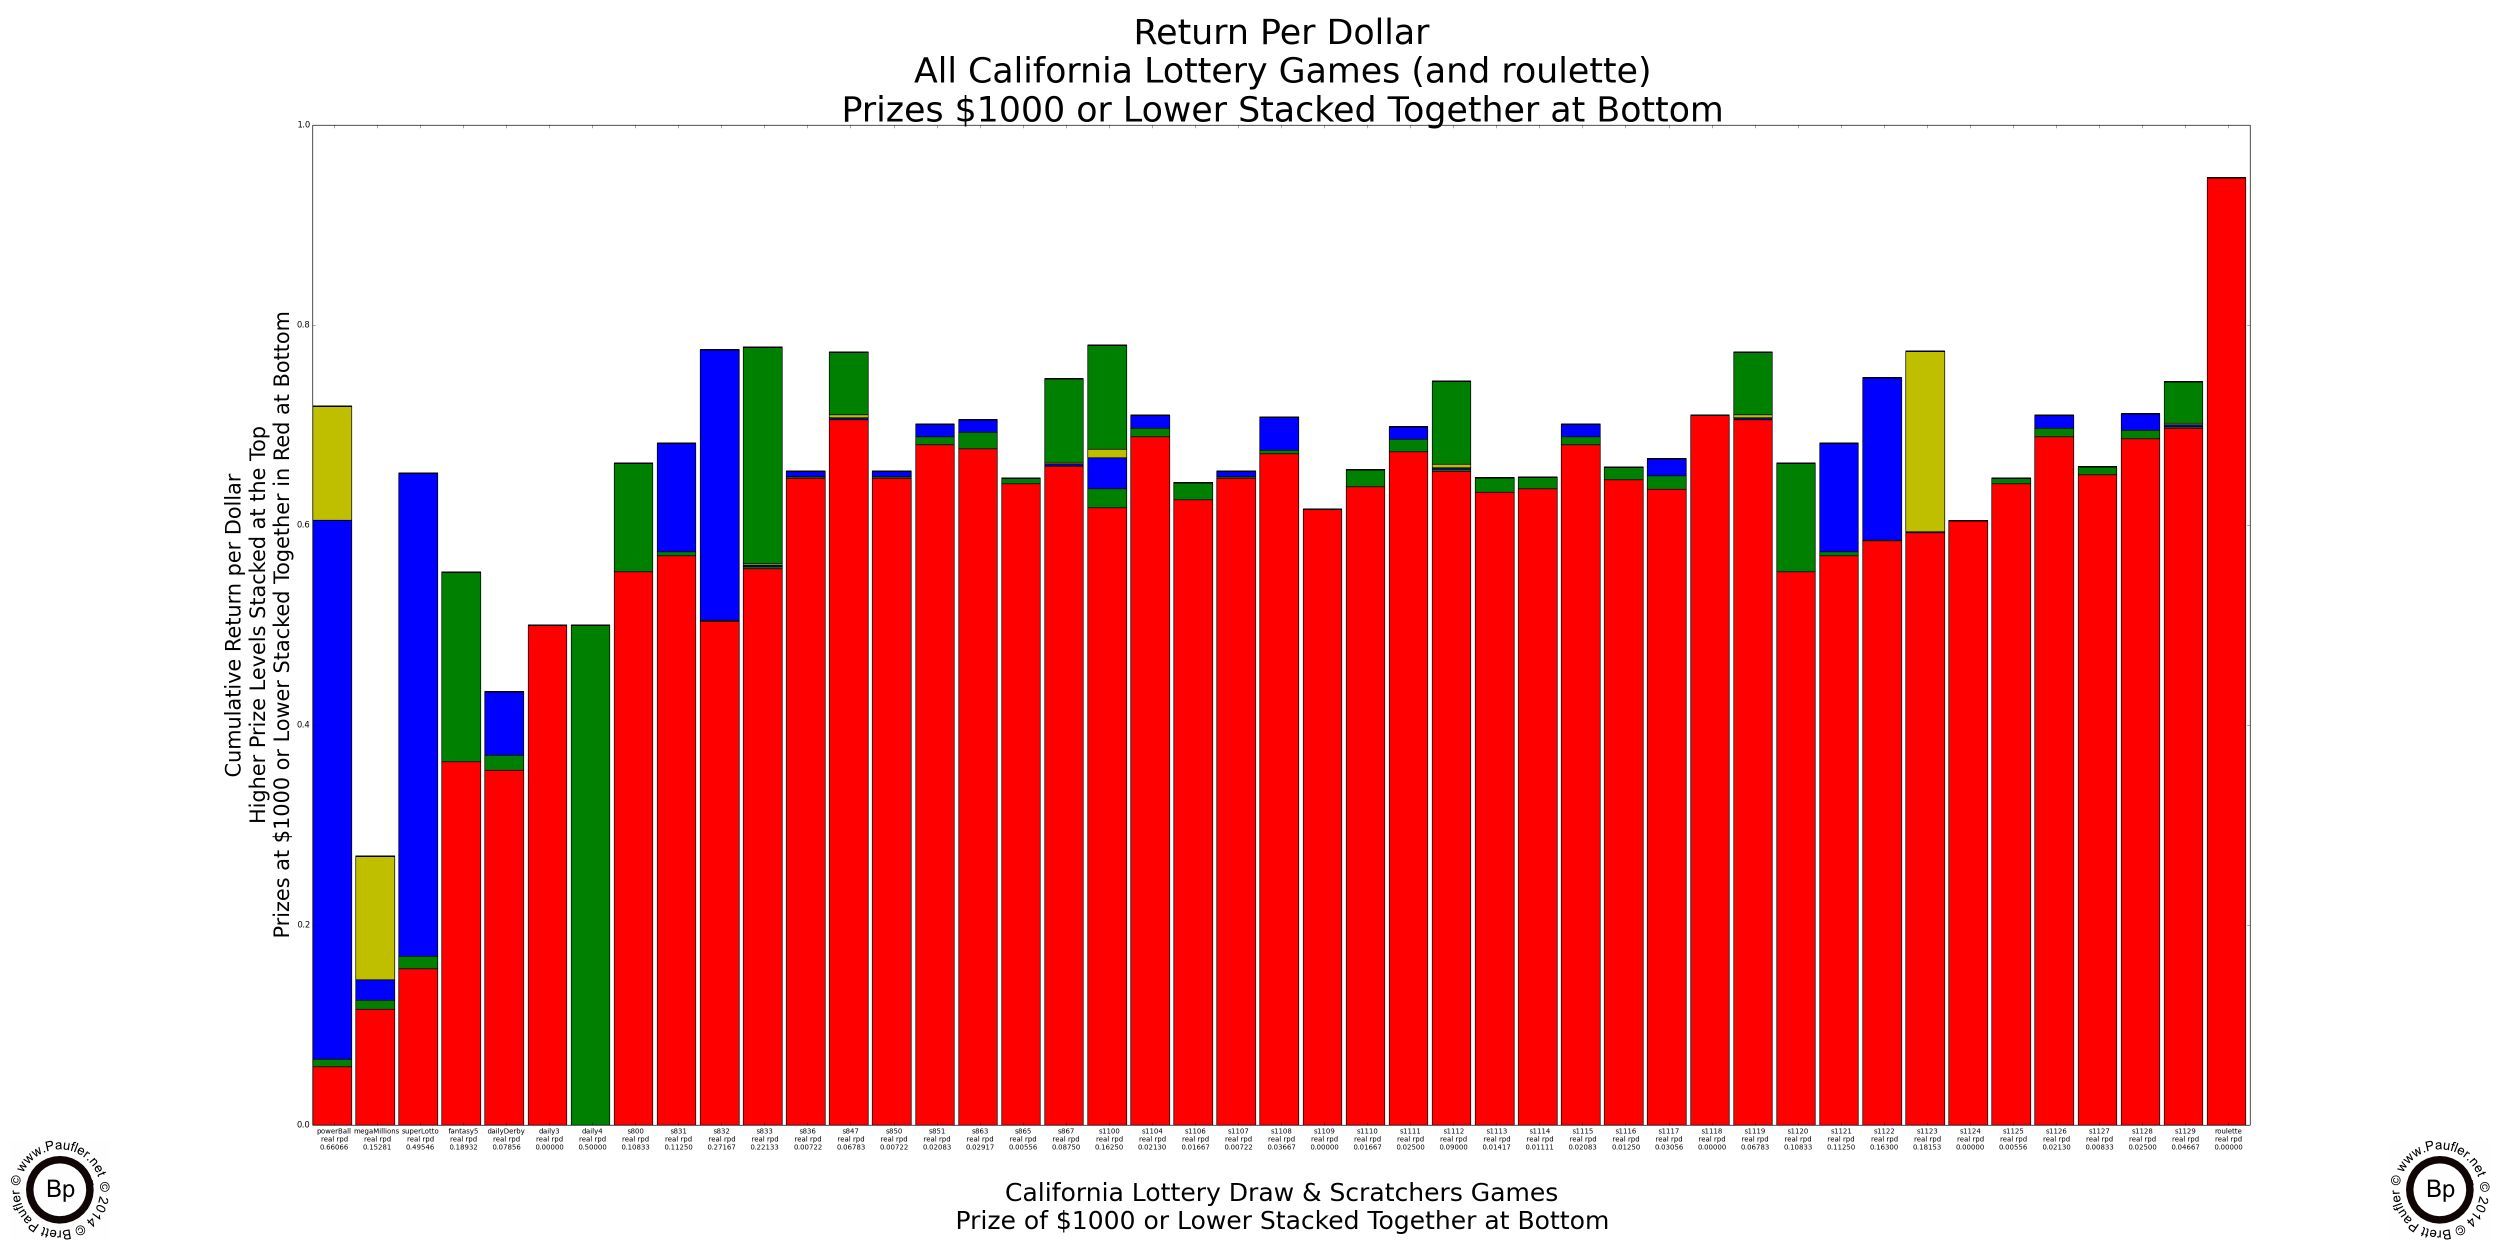 California Lottery Games Return Per Dollar Graph with return for prizes below $1000 lumped together